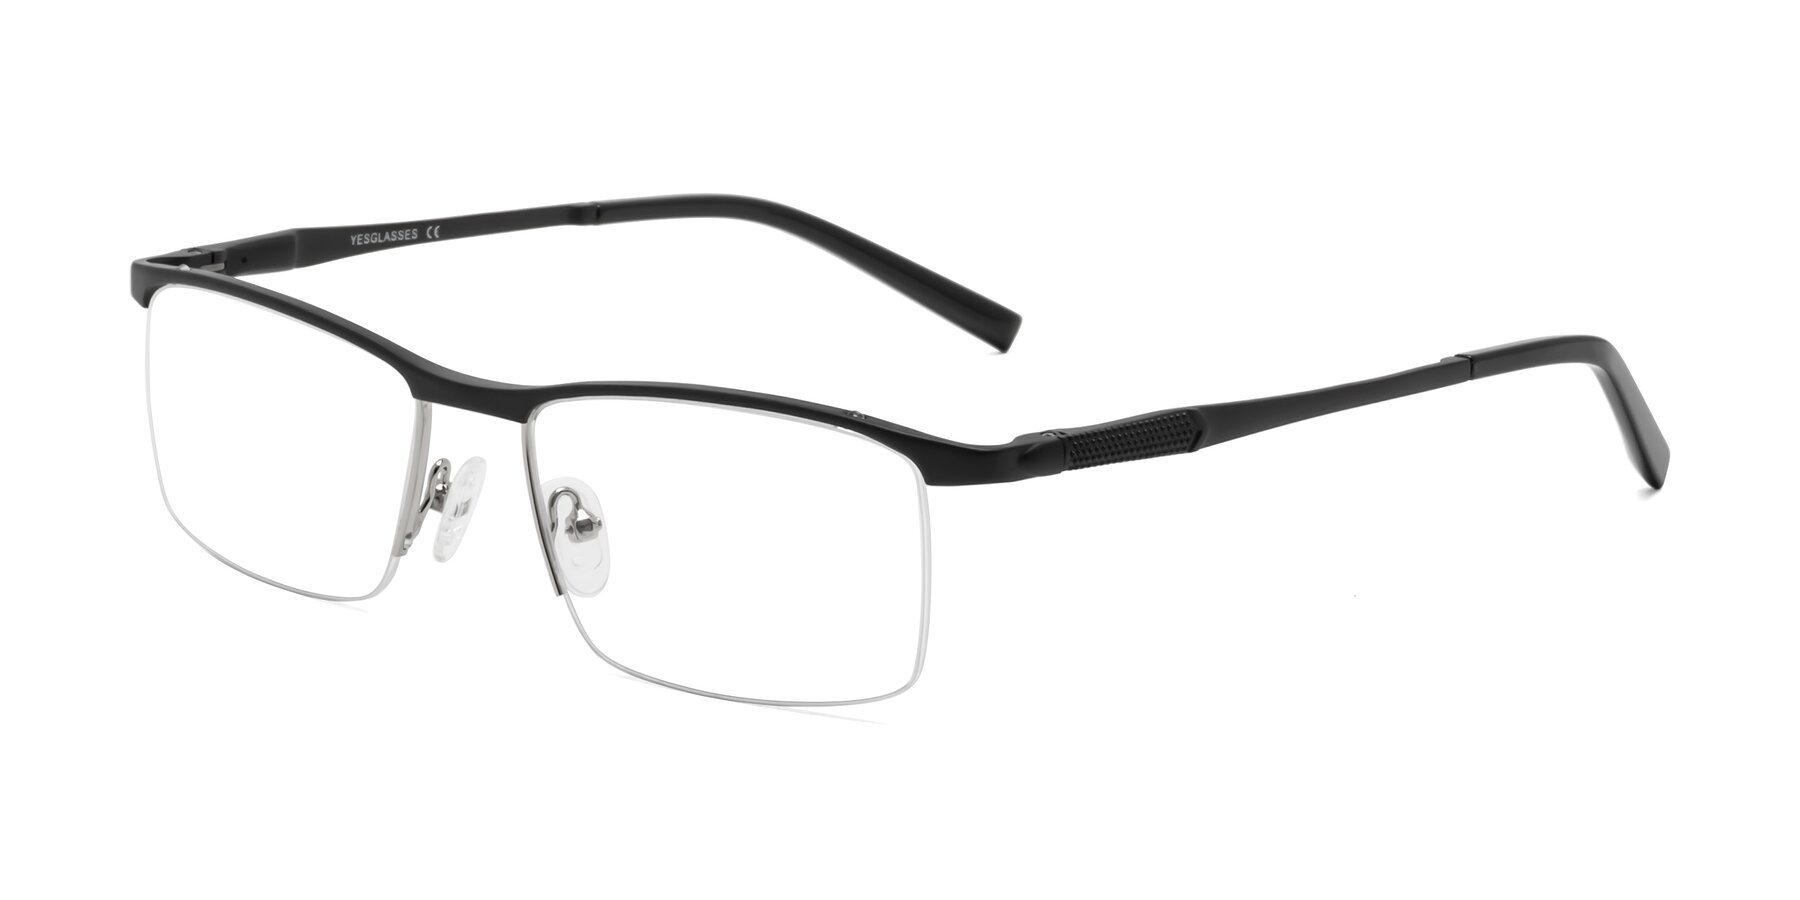 Angle of CX6303 in Black with Clear Eyeglass Lenses